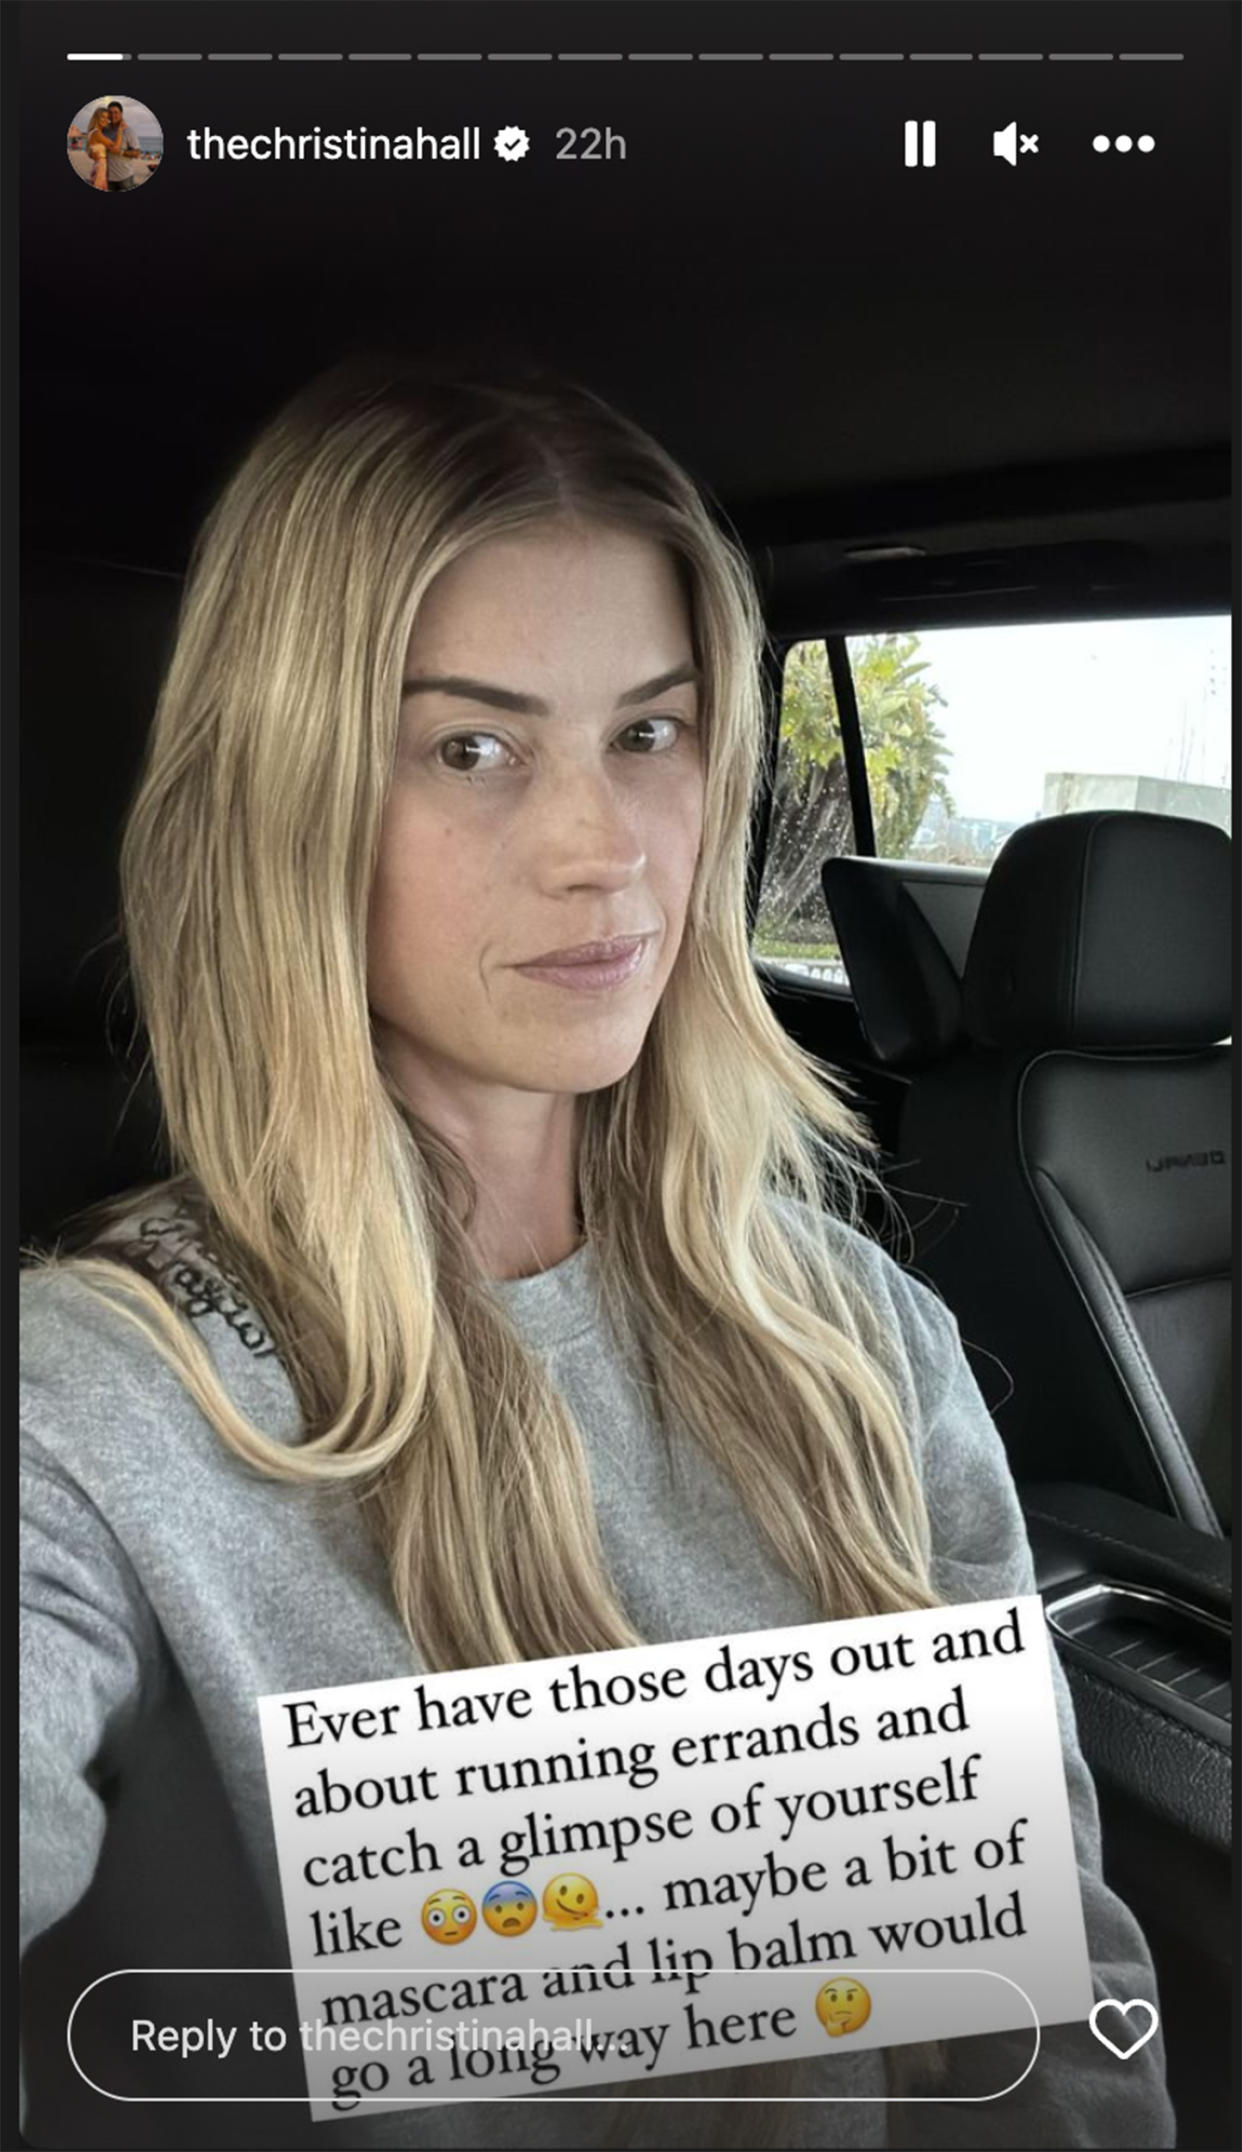 A makeup-free Christina Hall in her car. (@thechristinahall via Instagram )